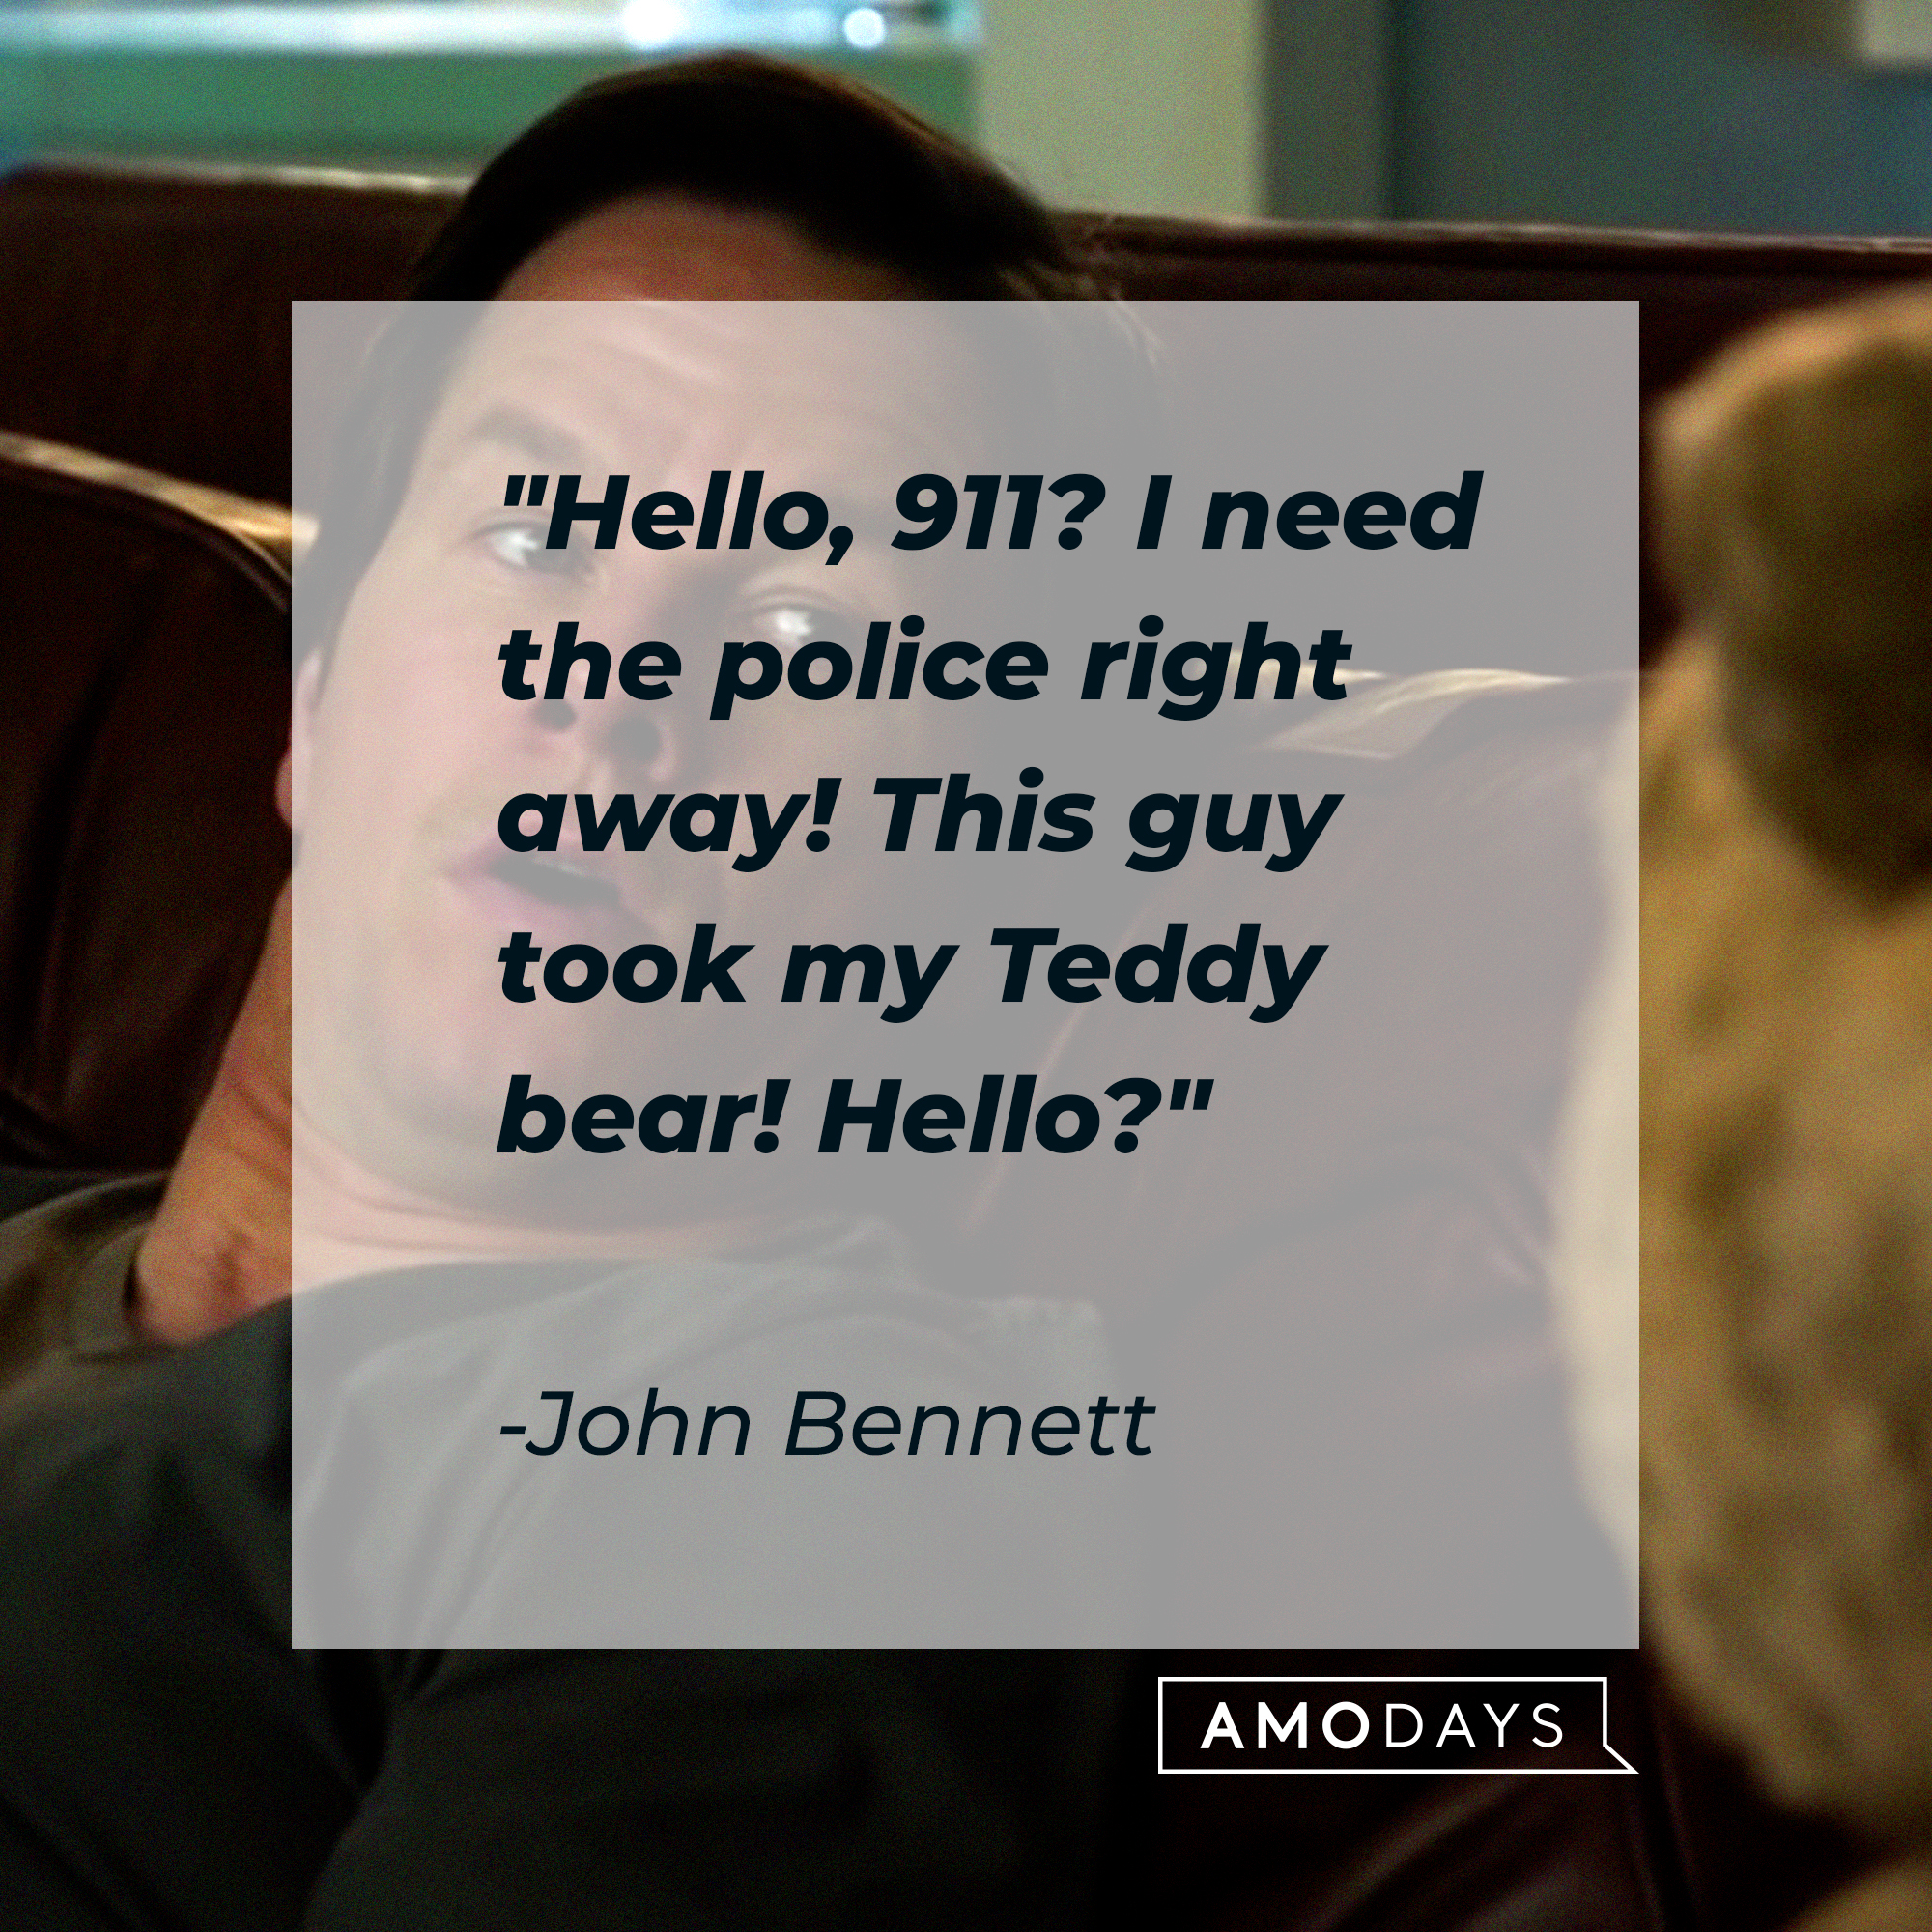 John Bennett's quote: "Hello, 911? I need the police right away! This guy took my Teddy bear! Hello?" | Source: facebook.com/tedisreal